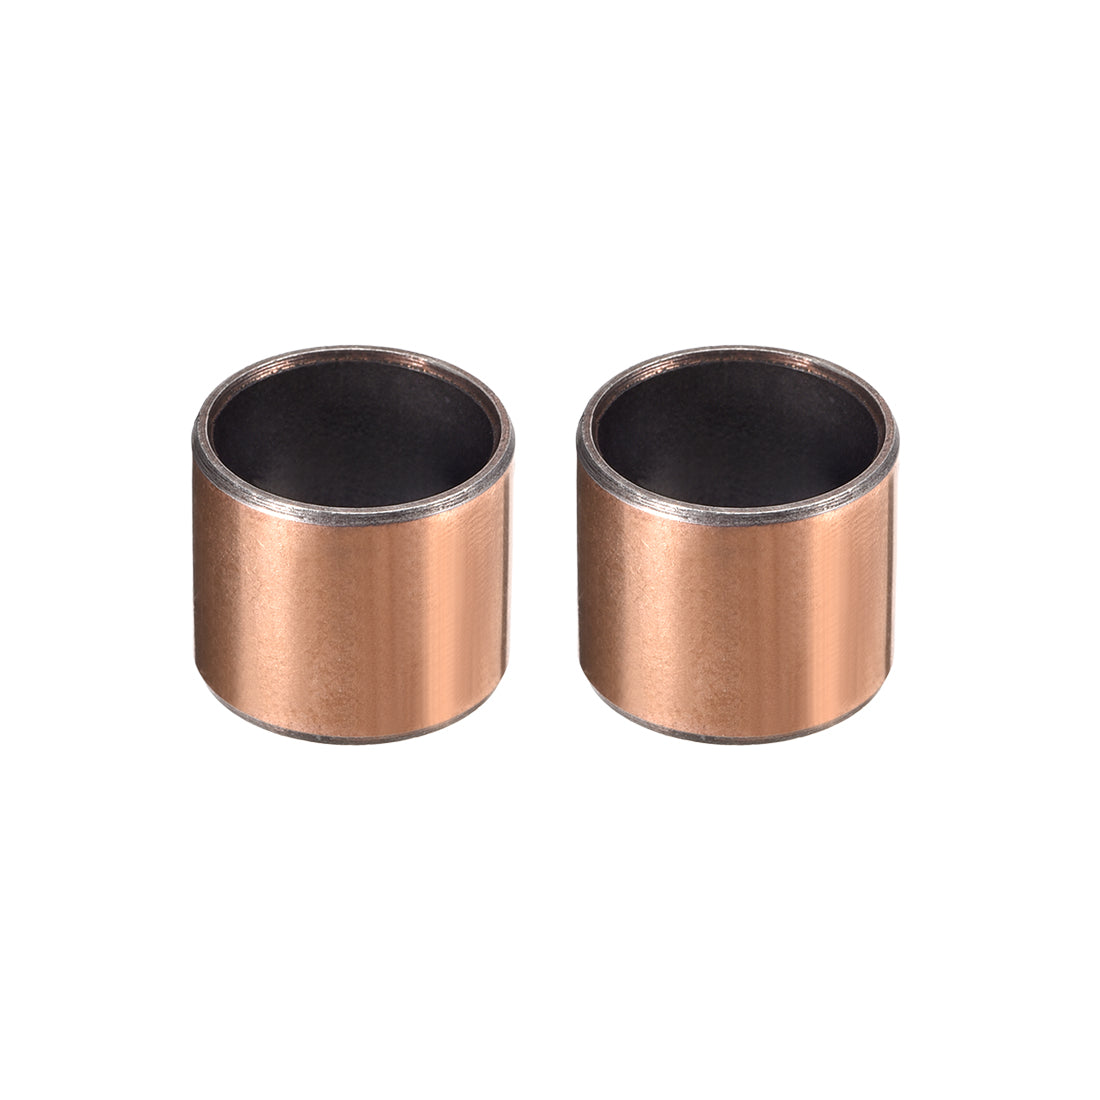 uxcell Uxcell Sleeve (Plain) Bearings 3/4" Bore 7/8" OD 3/4" L Wrapped Oilless Bushings 2pcs